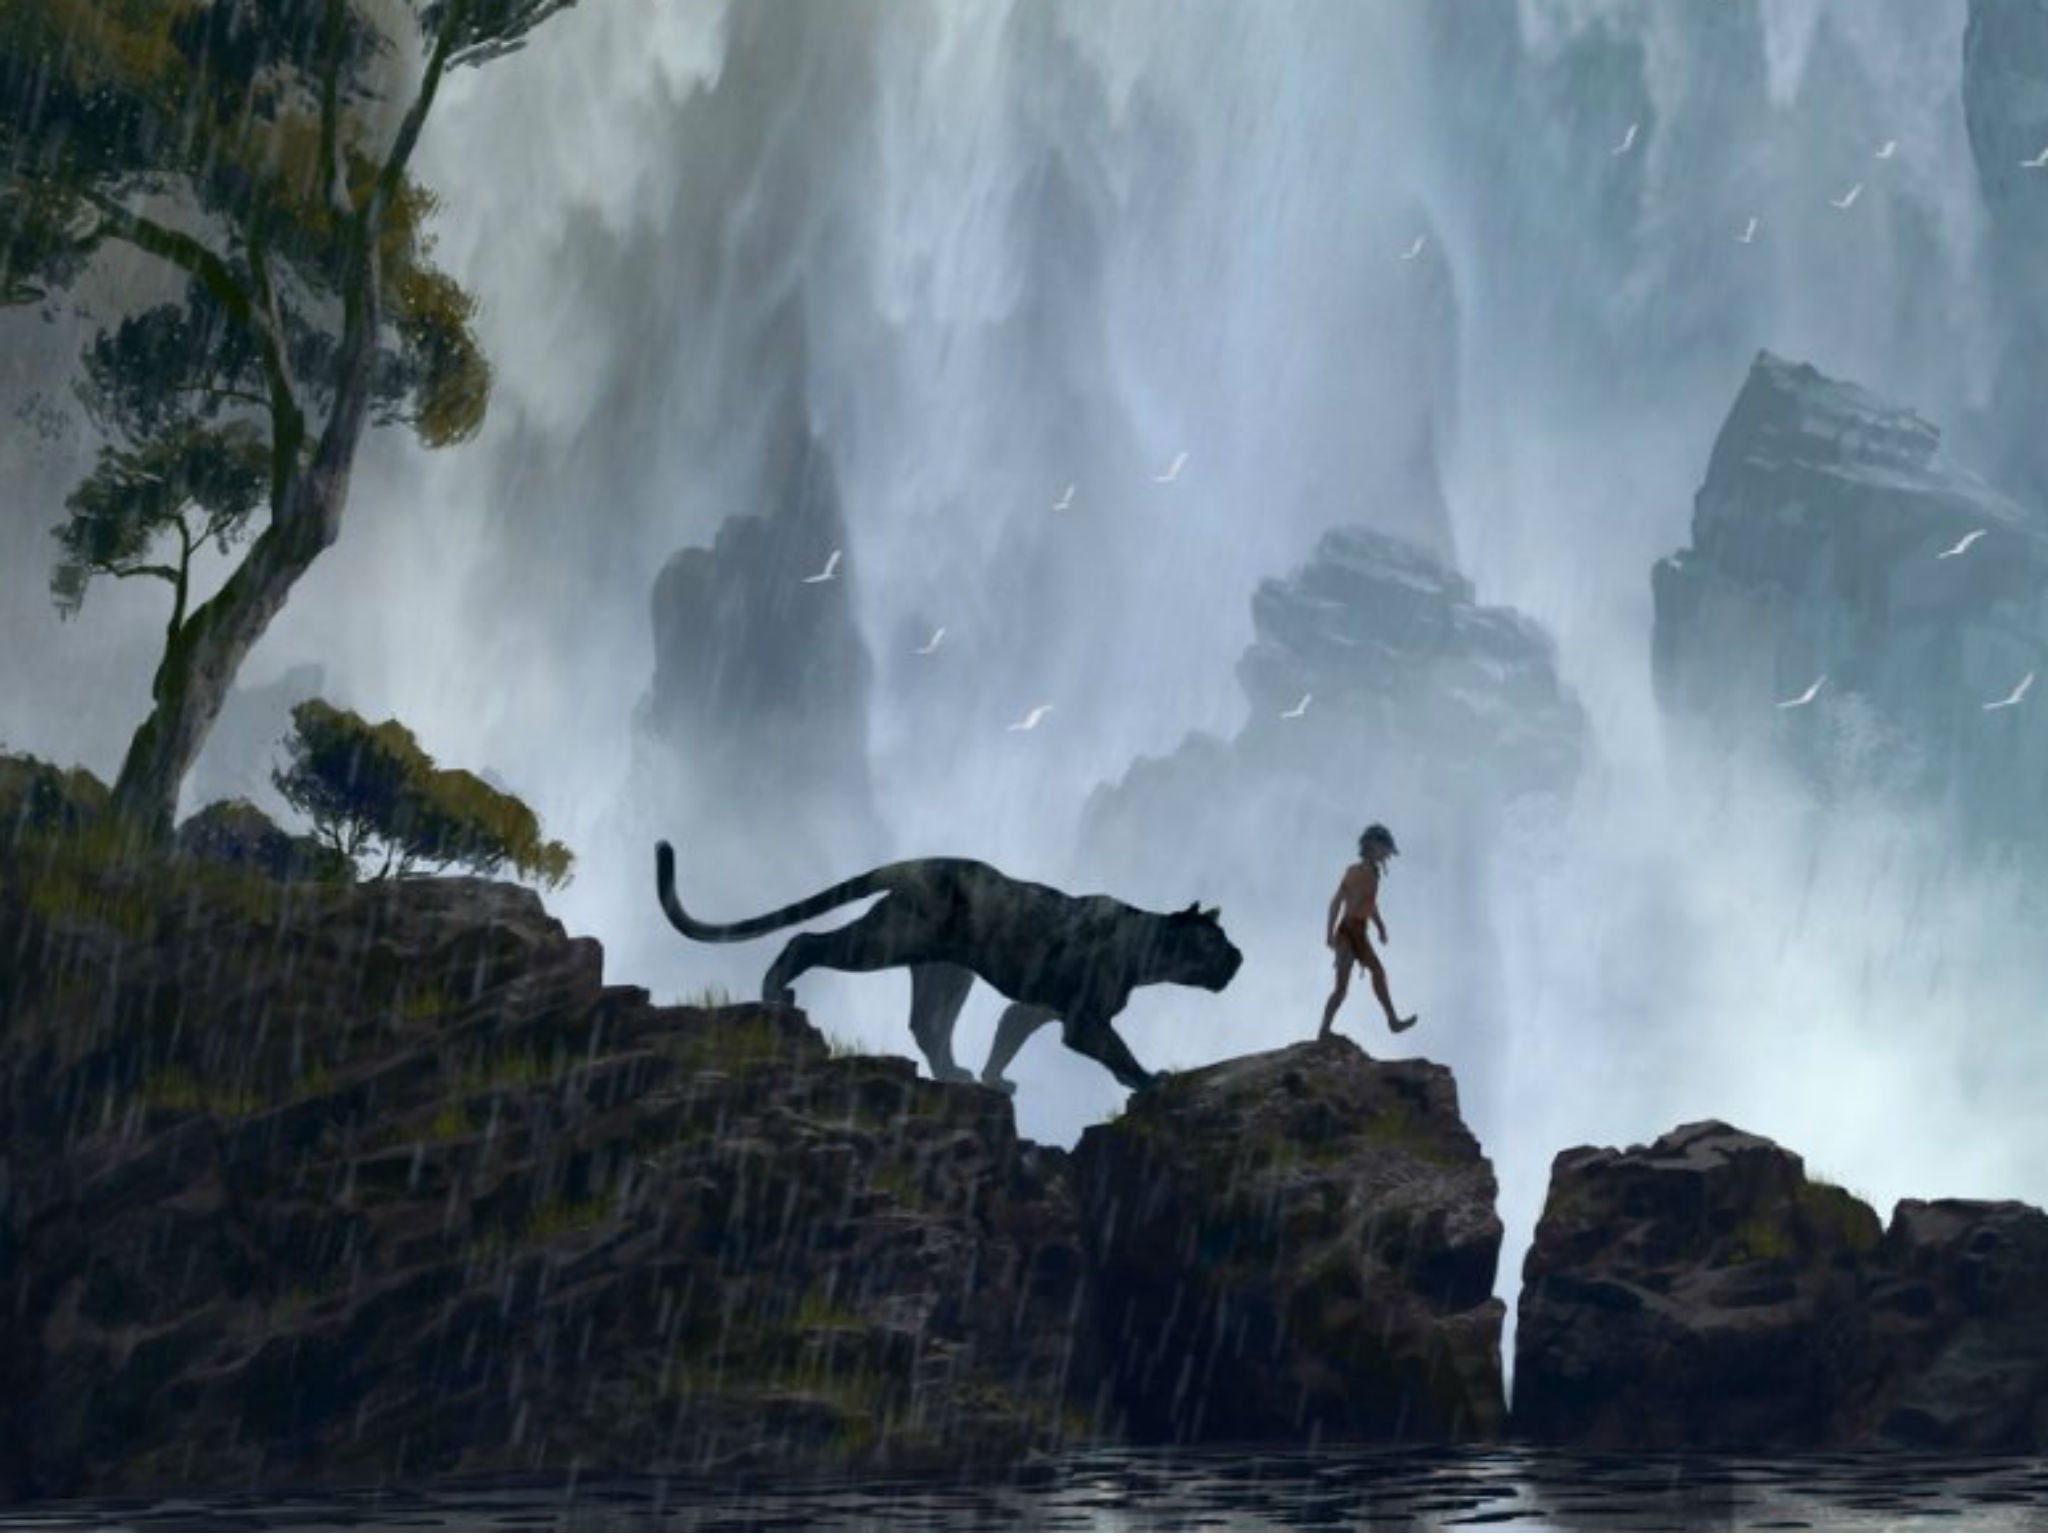 Disney's The Jungle Book is due in cinemas next April